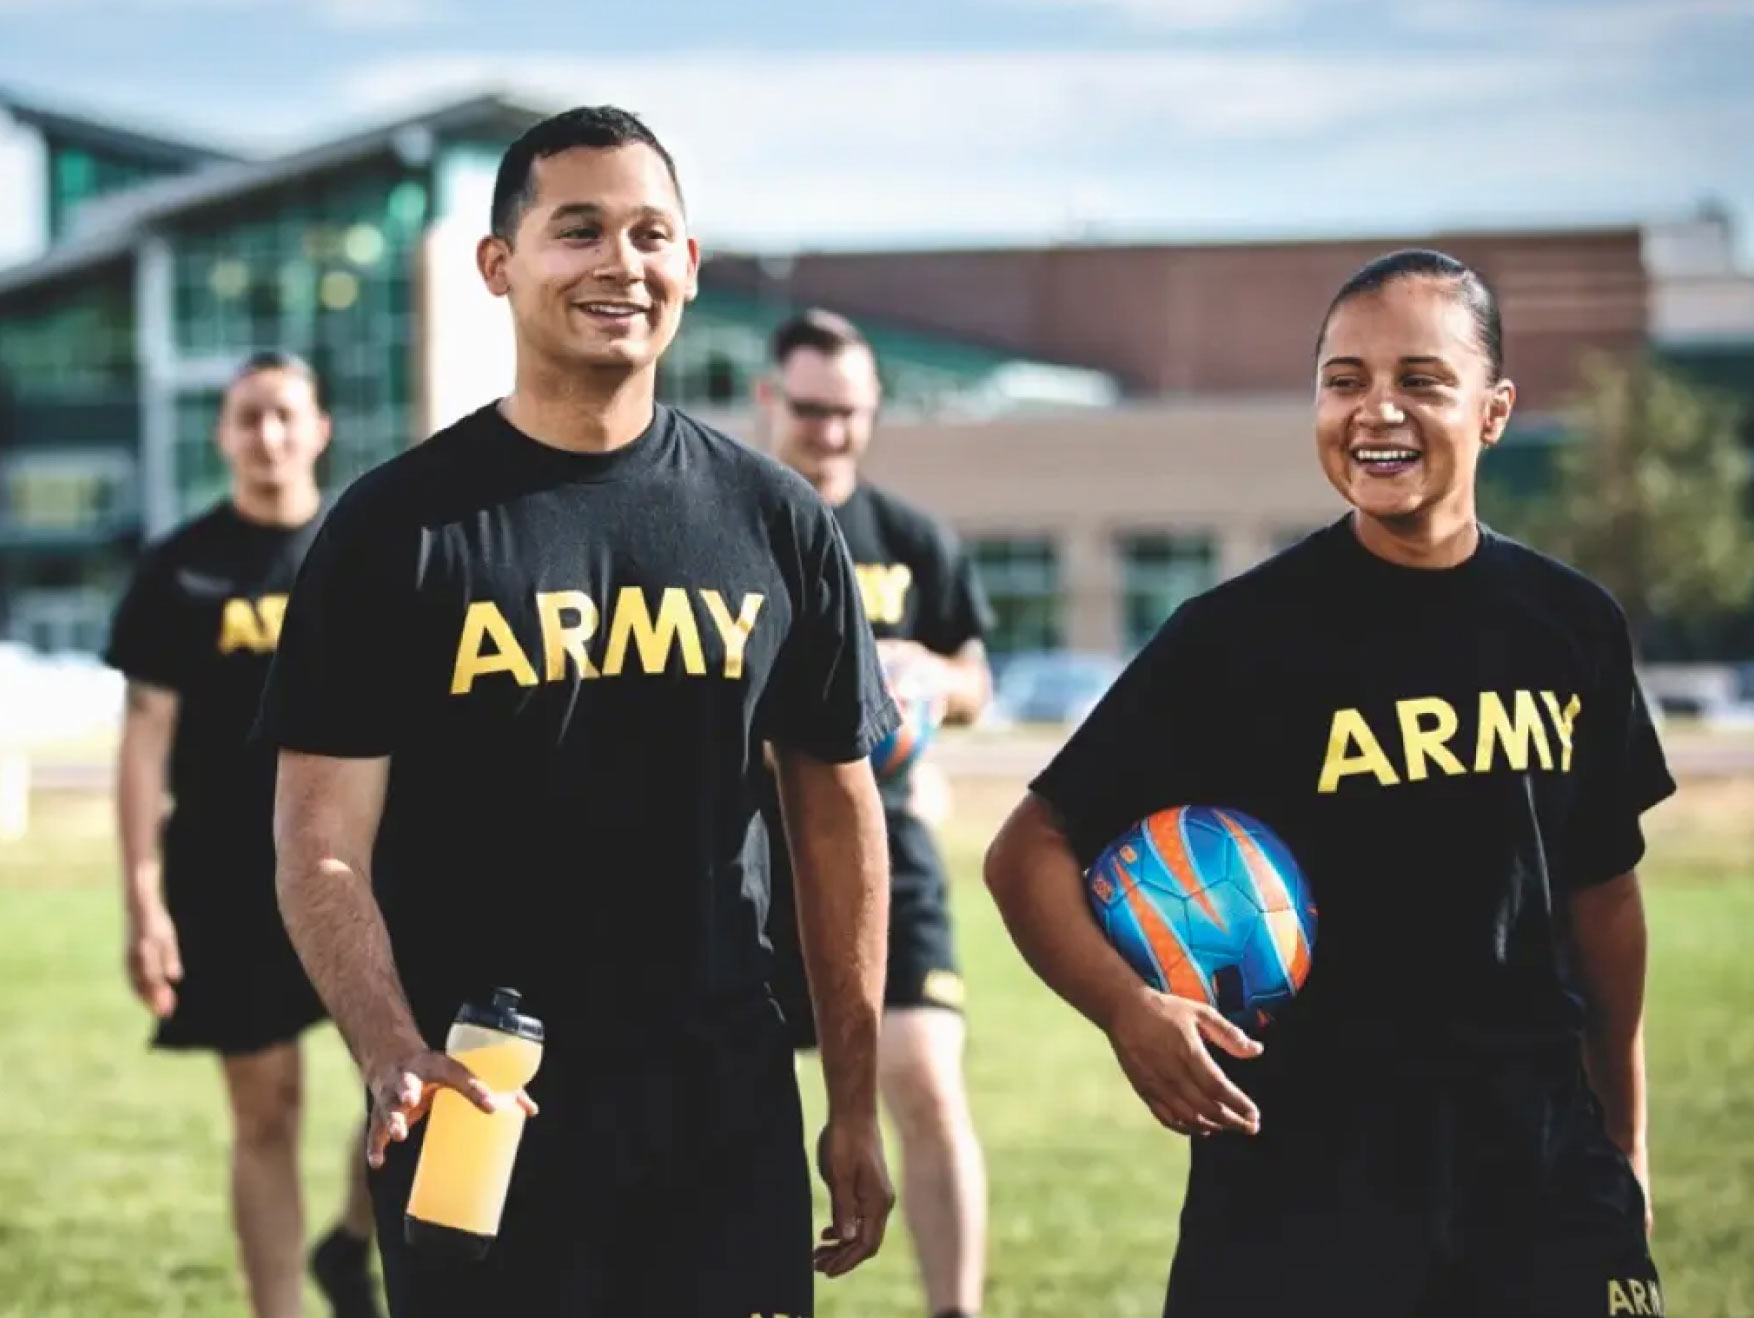 Three Soldiers in Army T-shirts, one holding a sports bottle and another holding a soccer ball